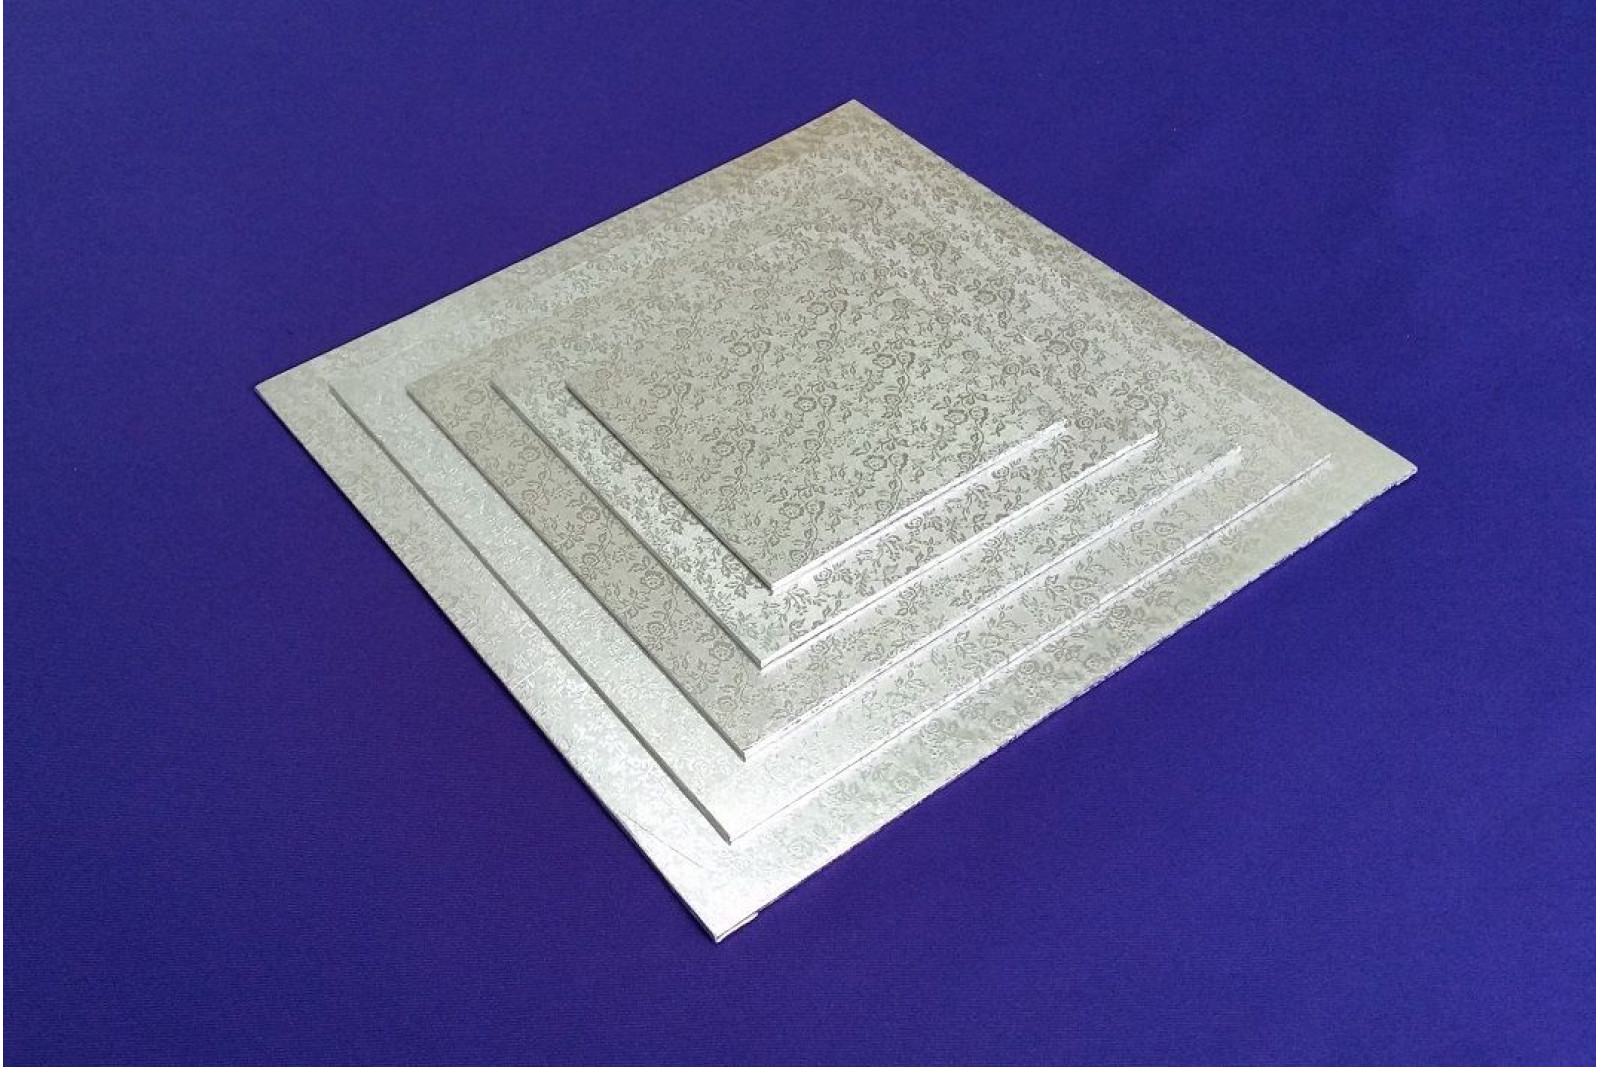 12 Inch | Silver | Square 3 mm | Cake Boards Masonite | Premium Quality | Great Christmas Bake Off